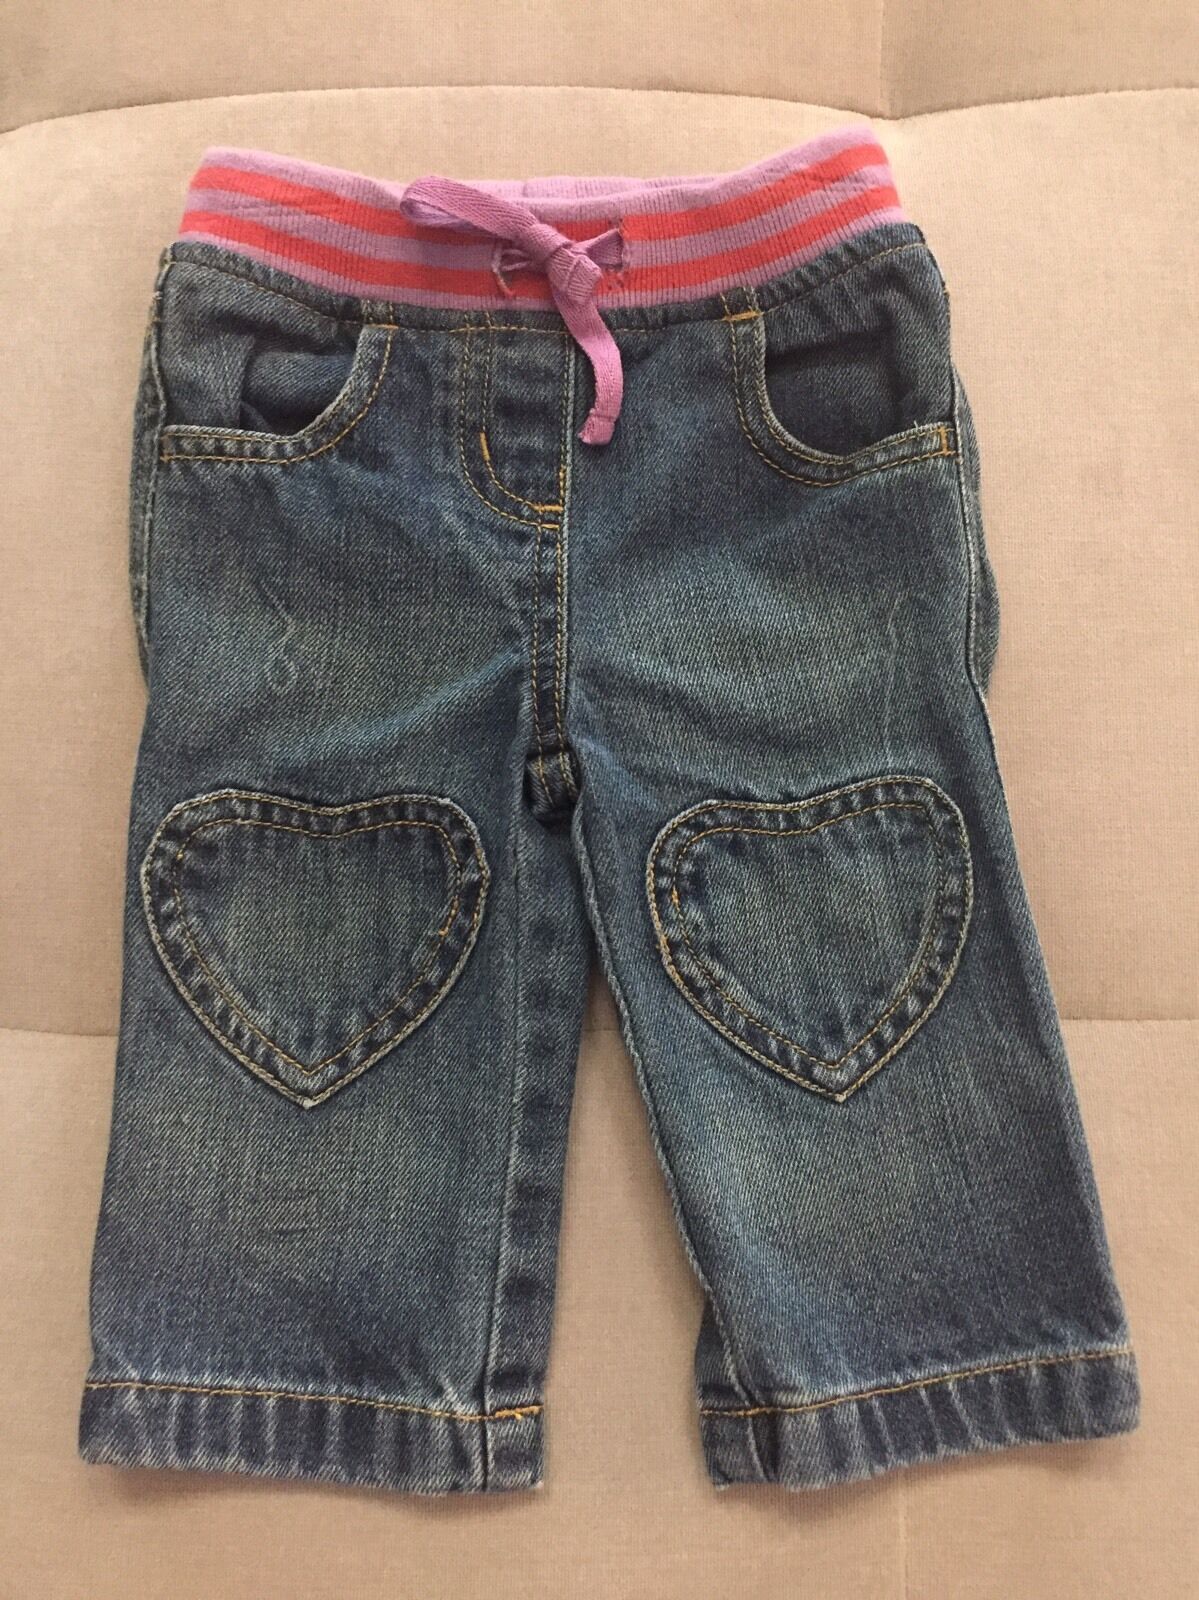 Baby Biden Girl Blue Pink Hearts Patches Jeans 6-12 Month Pull On